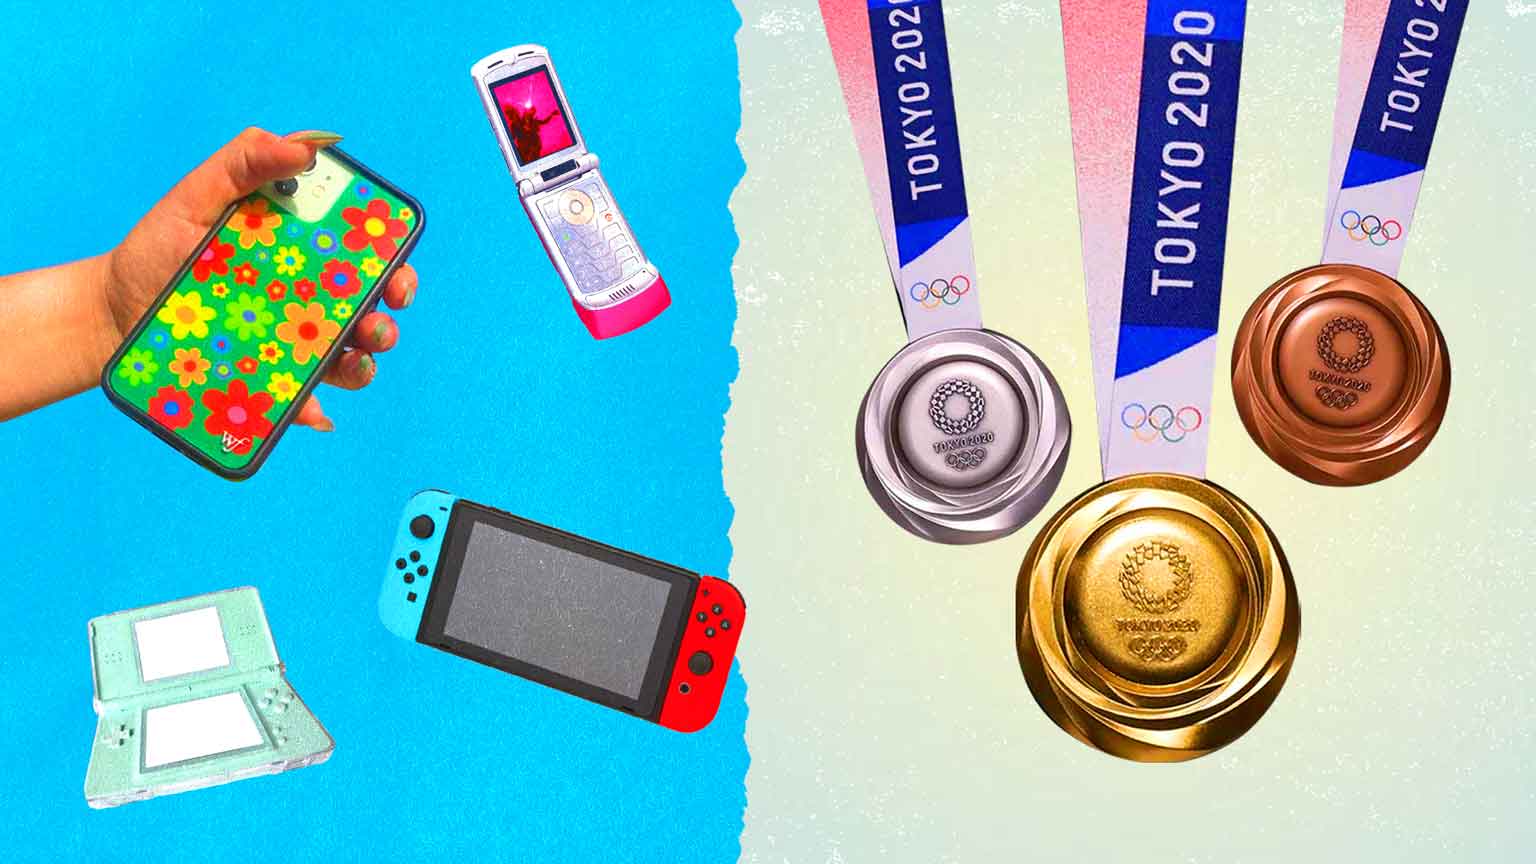 Did You Know, You’re Old Gadgets Could Have Been Used To Make The Tokyo Olympics Medals